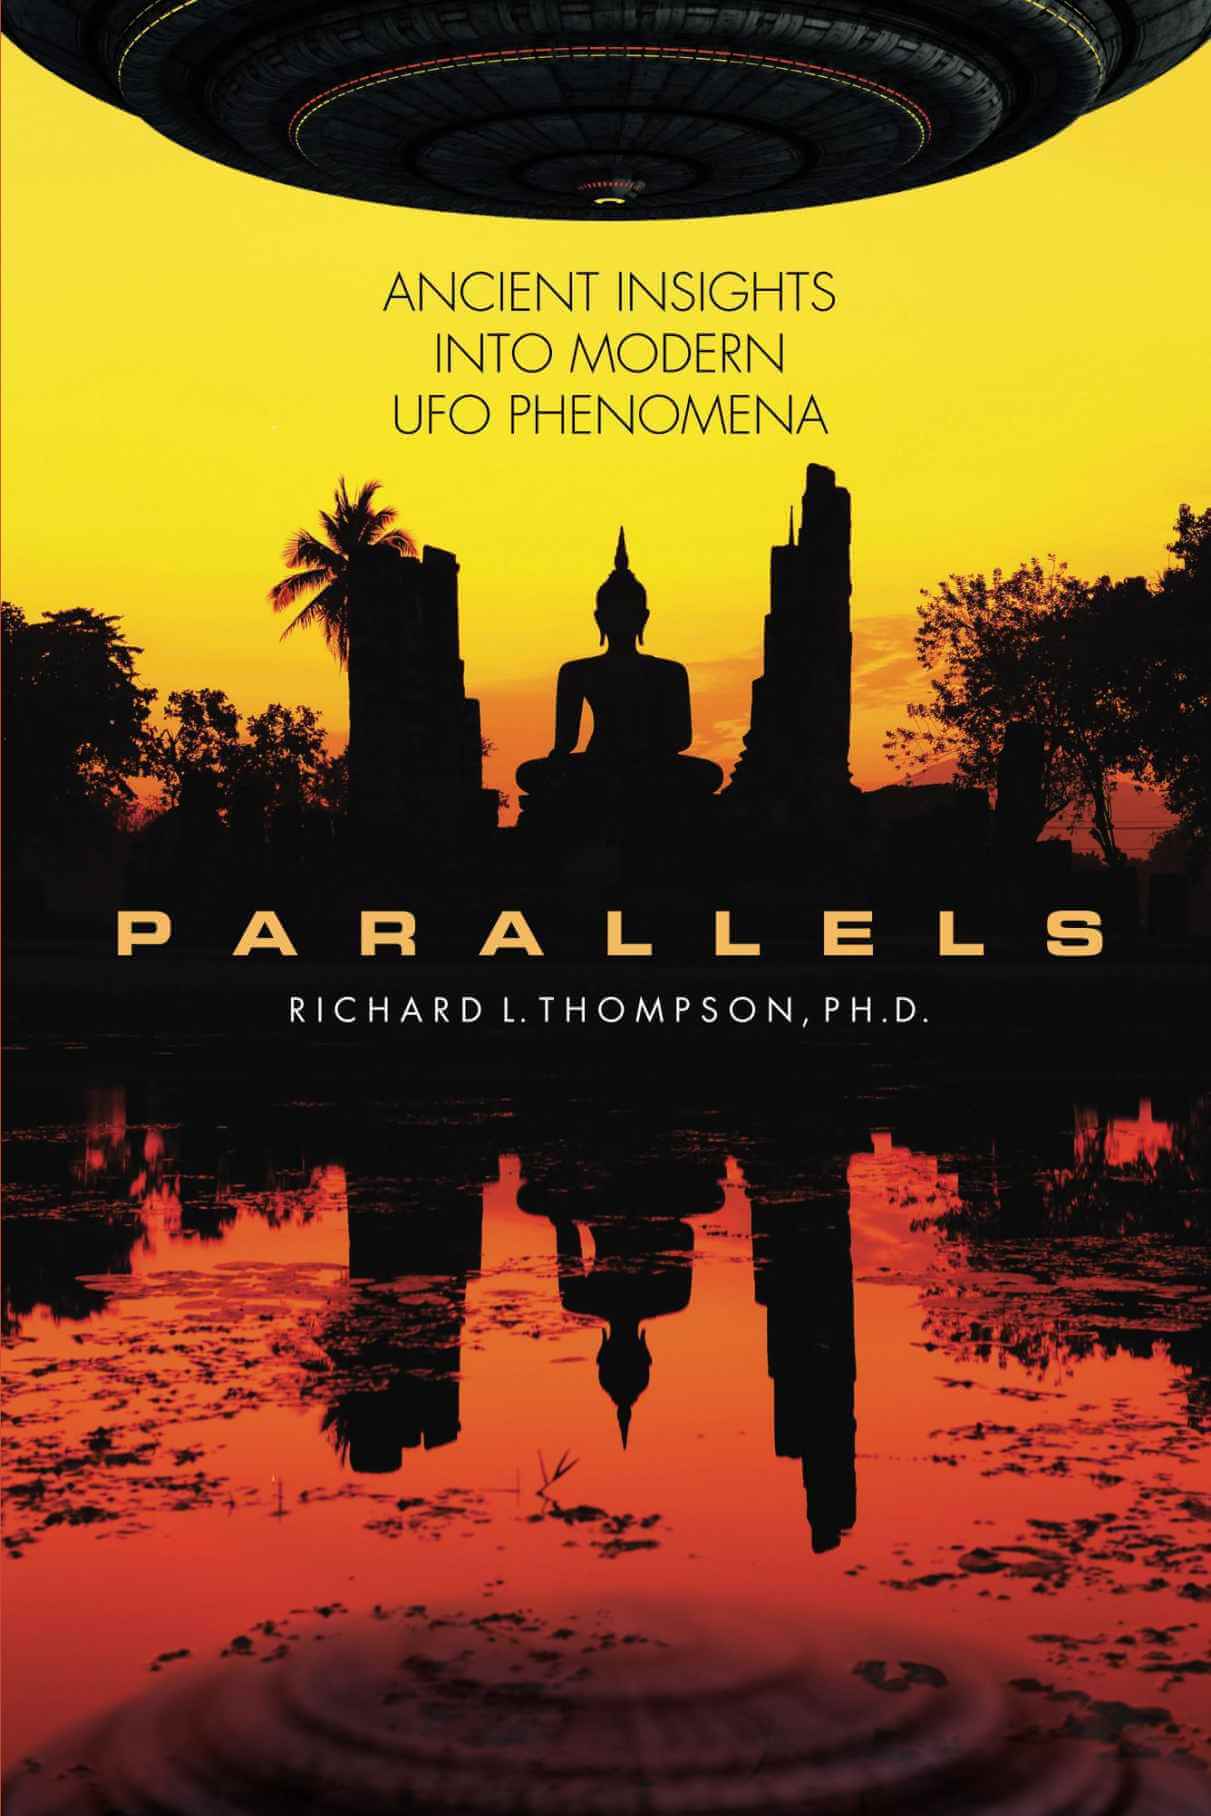 Parallels - Ancient Insights into Modern UFO Phenomena